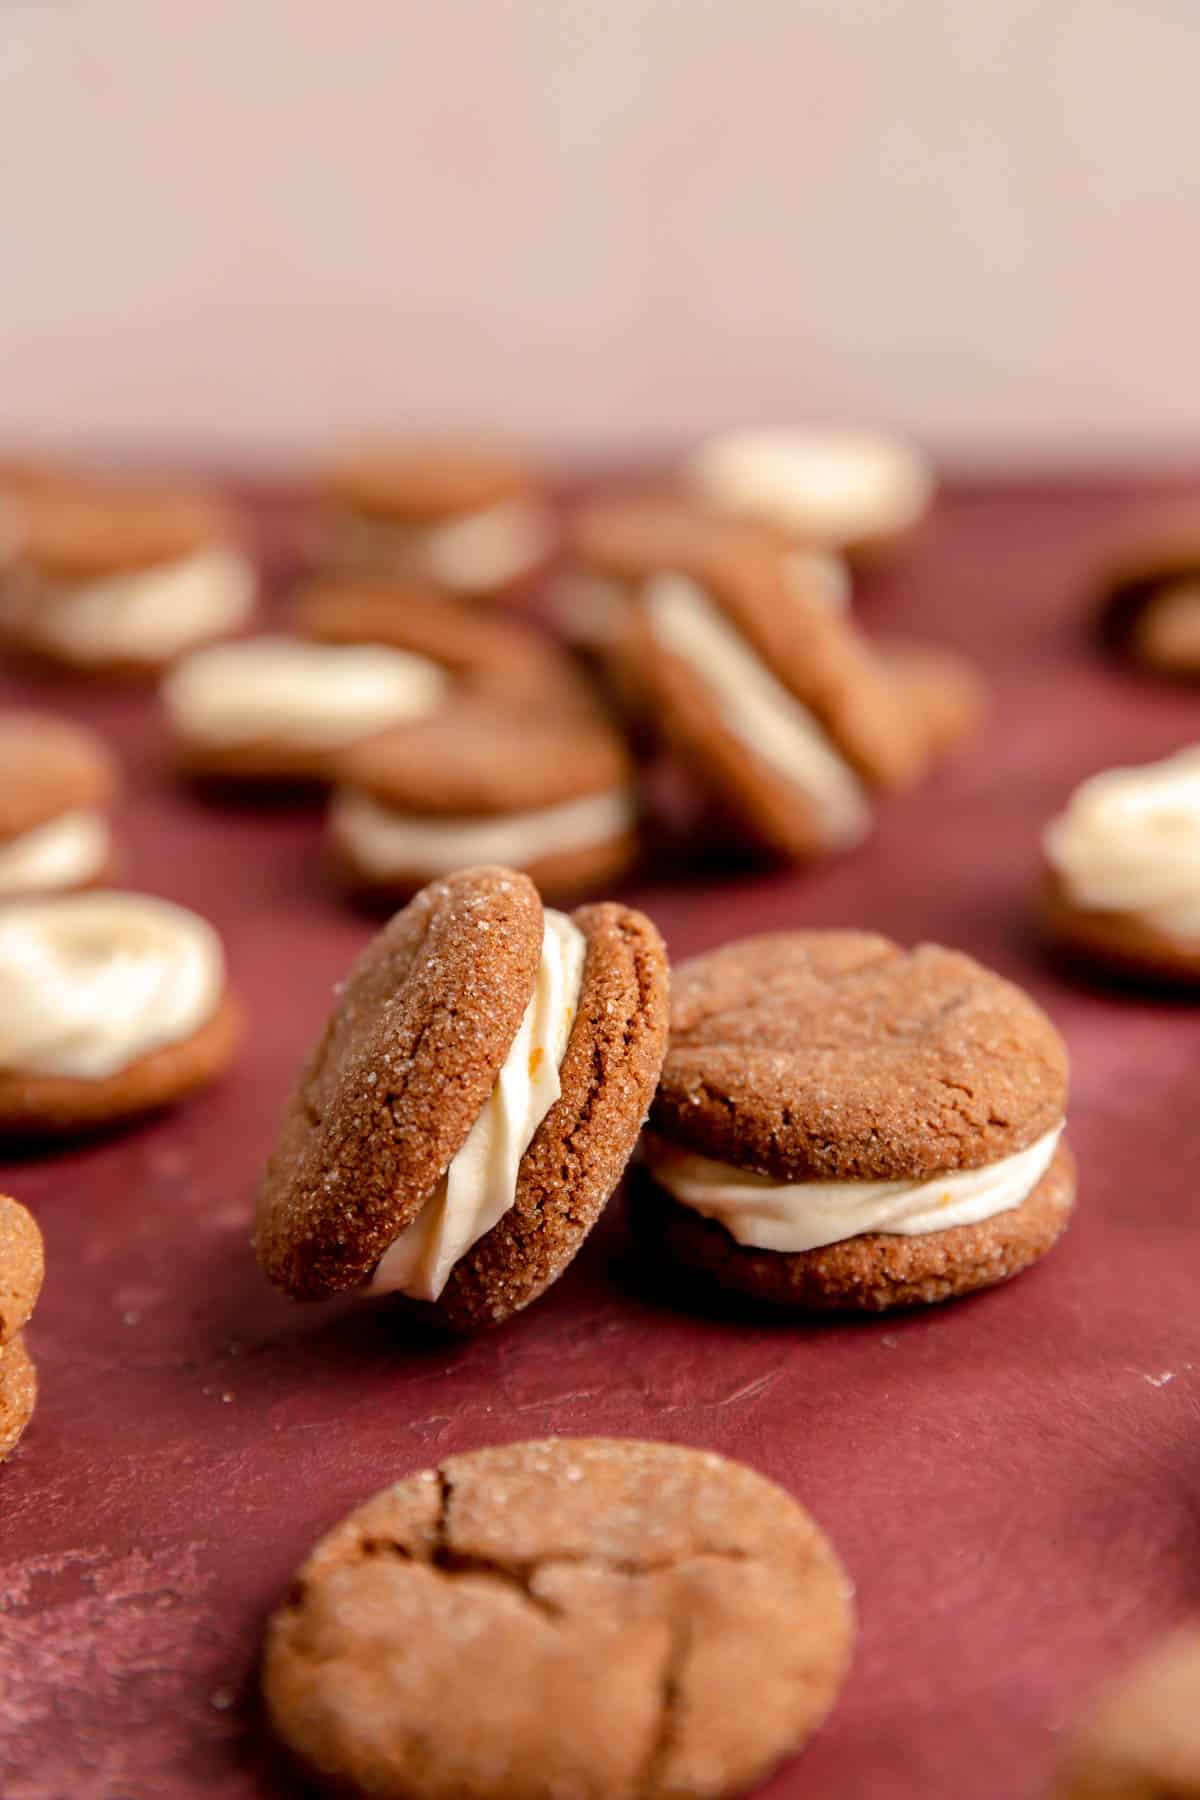 Ginger cream sandwich cookies with one leaning on its side and others scattered in the background